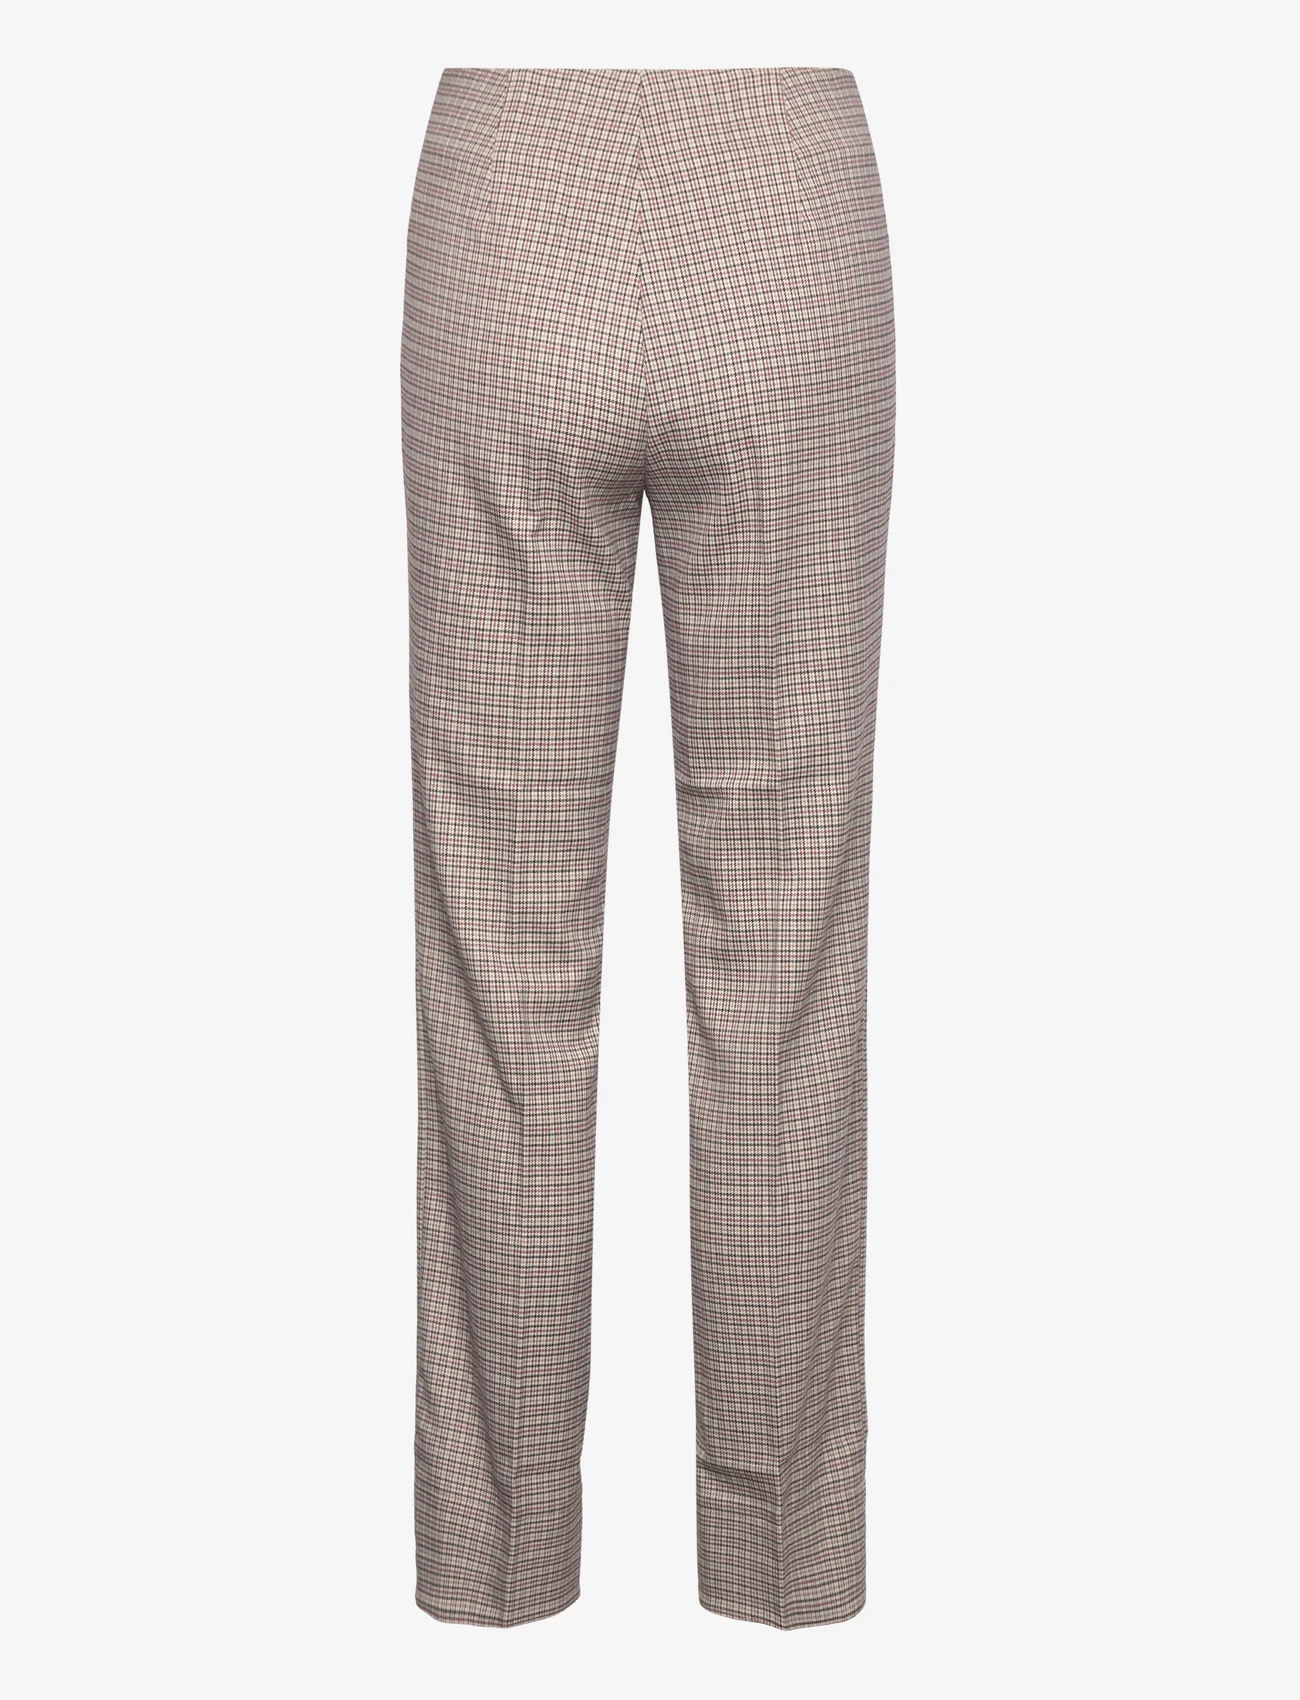 Notes du Nord - Emia Pants - slim fit trousers - checked - 1